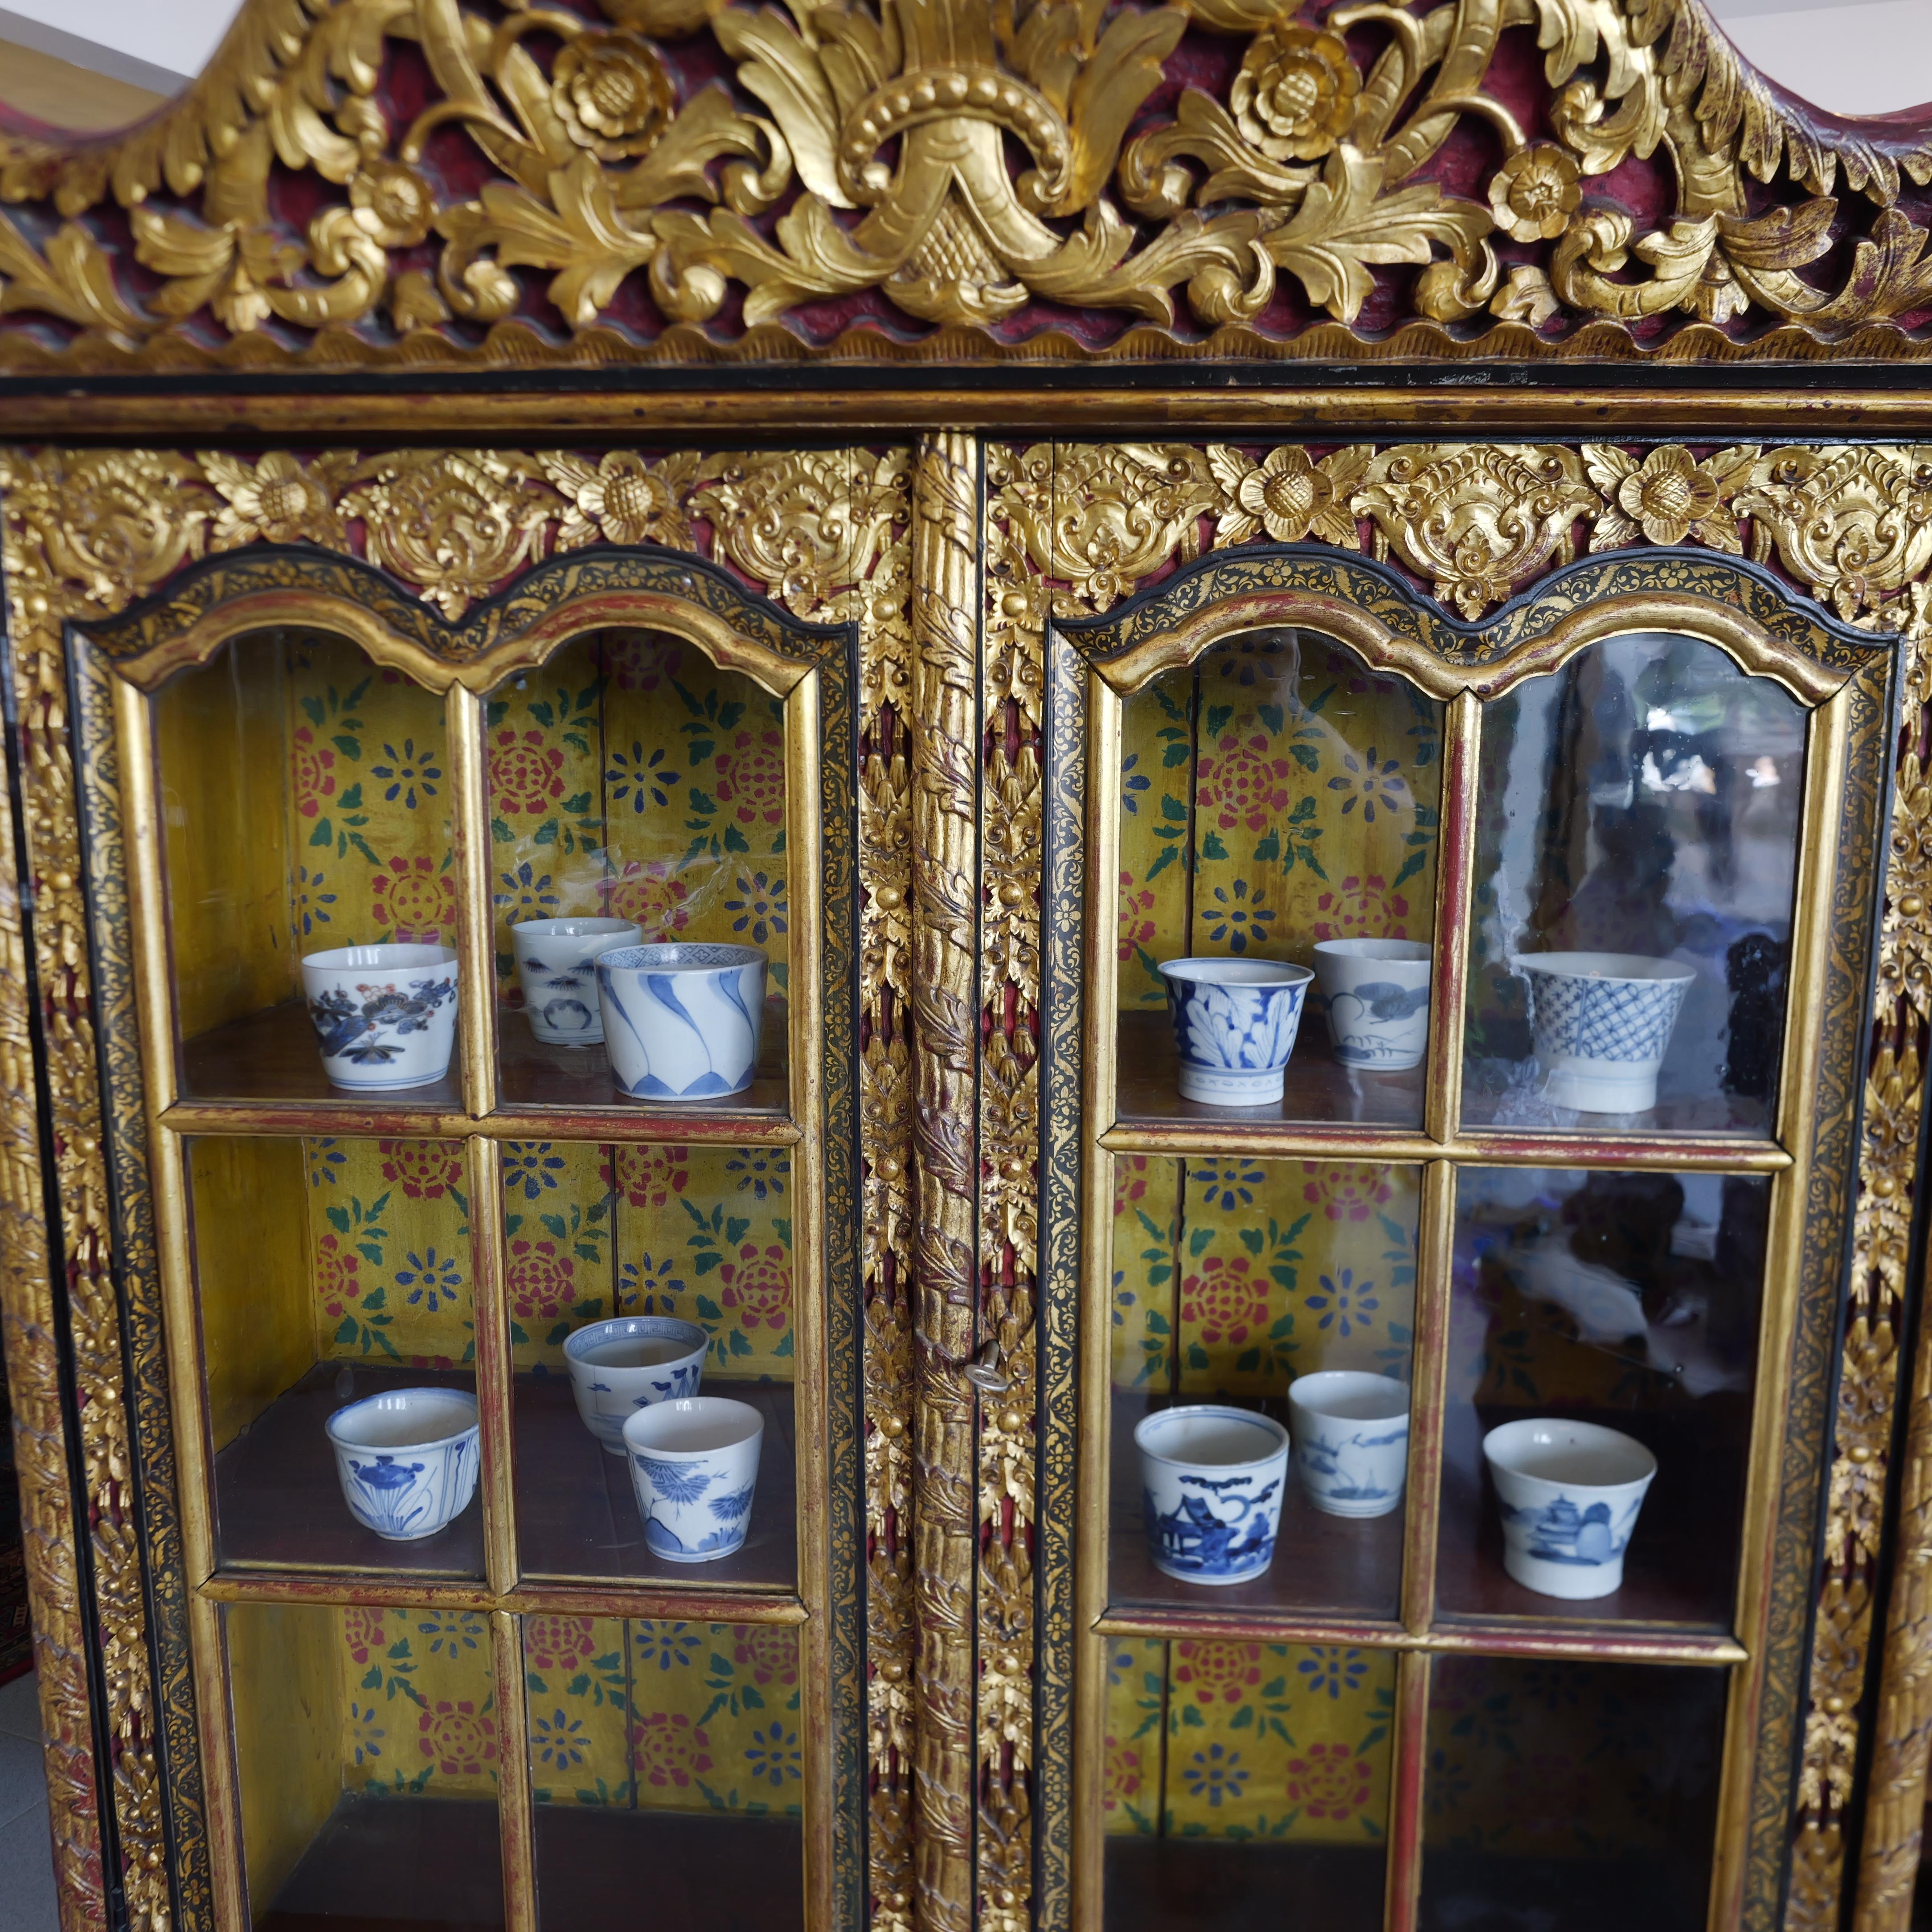 This 19th-century Indonesian Export Carved Lacquer Paint and Gilt cabinet is a magnificent example of the exquisite craftsmanship and artistic flair of the late 19th century. This cabinet is comprised of two separate pieces: the top piece features